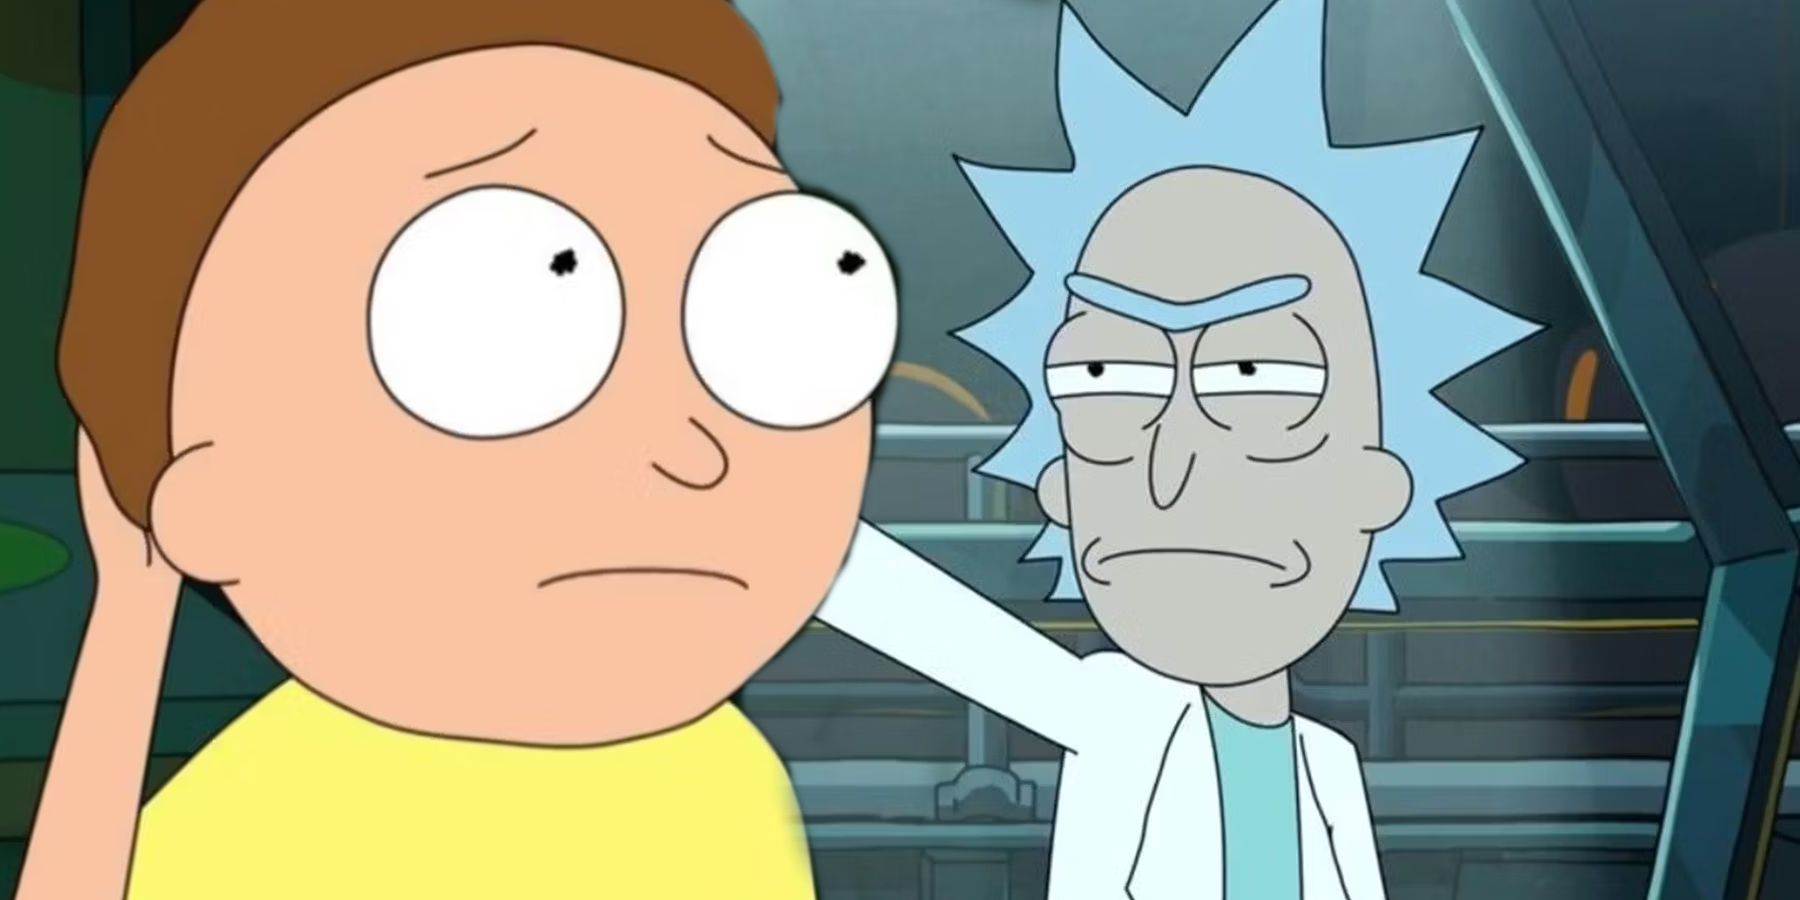 Morty looking nervous and Rick looking determined in Rick and Morty.